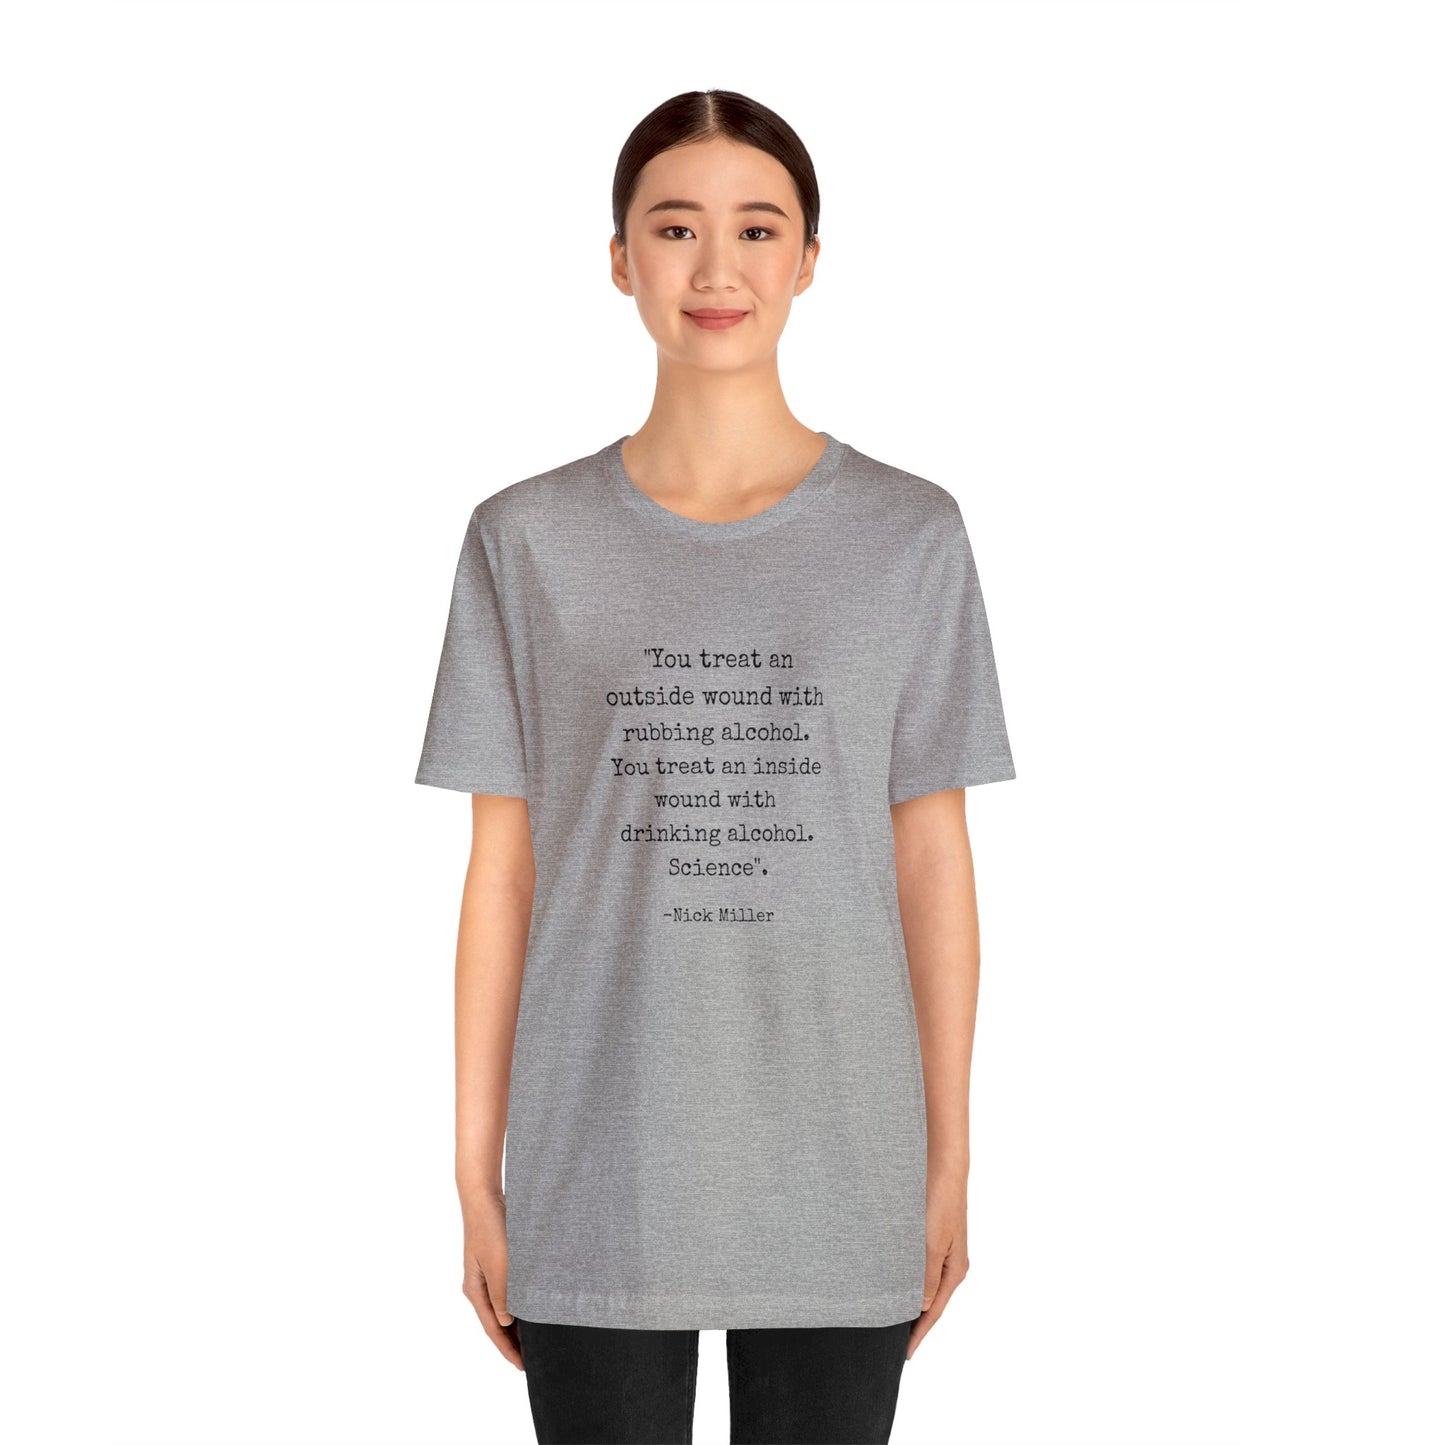 Nick Miller "alcohol" quote tee - New Girl fan t-shirt gift